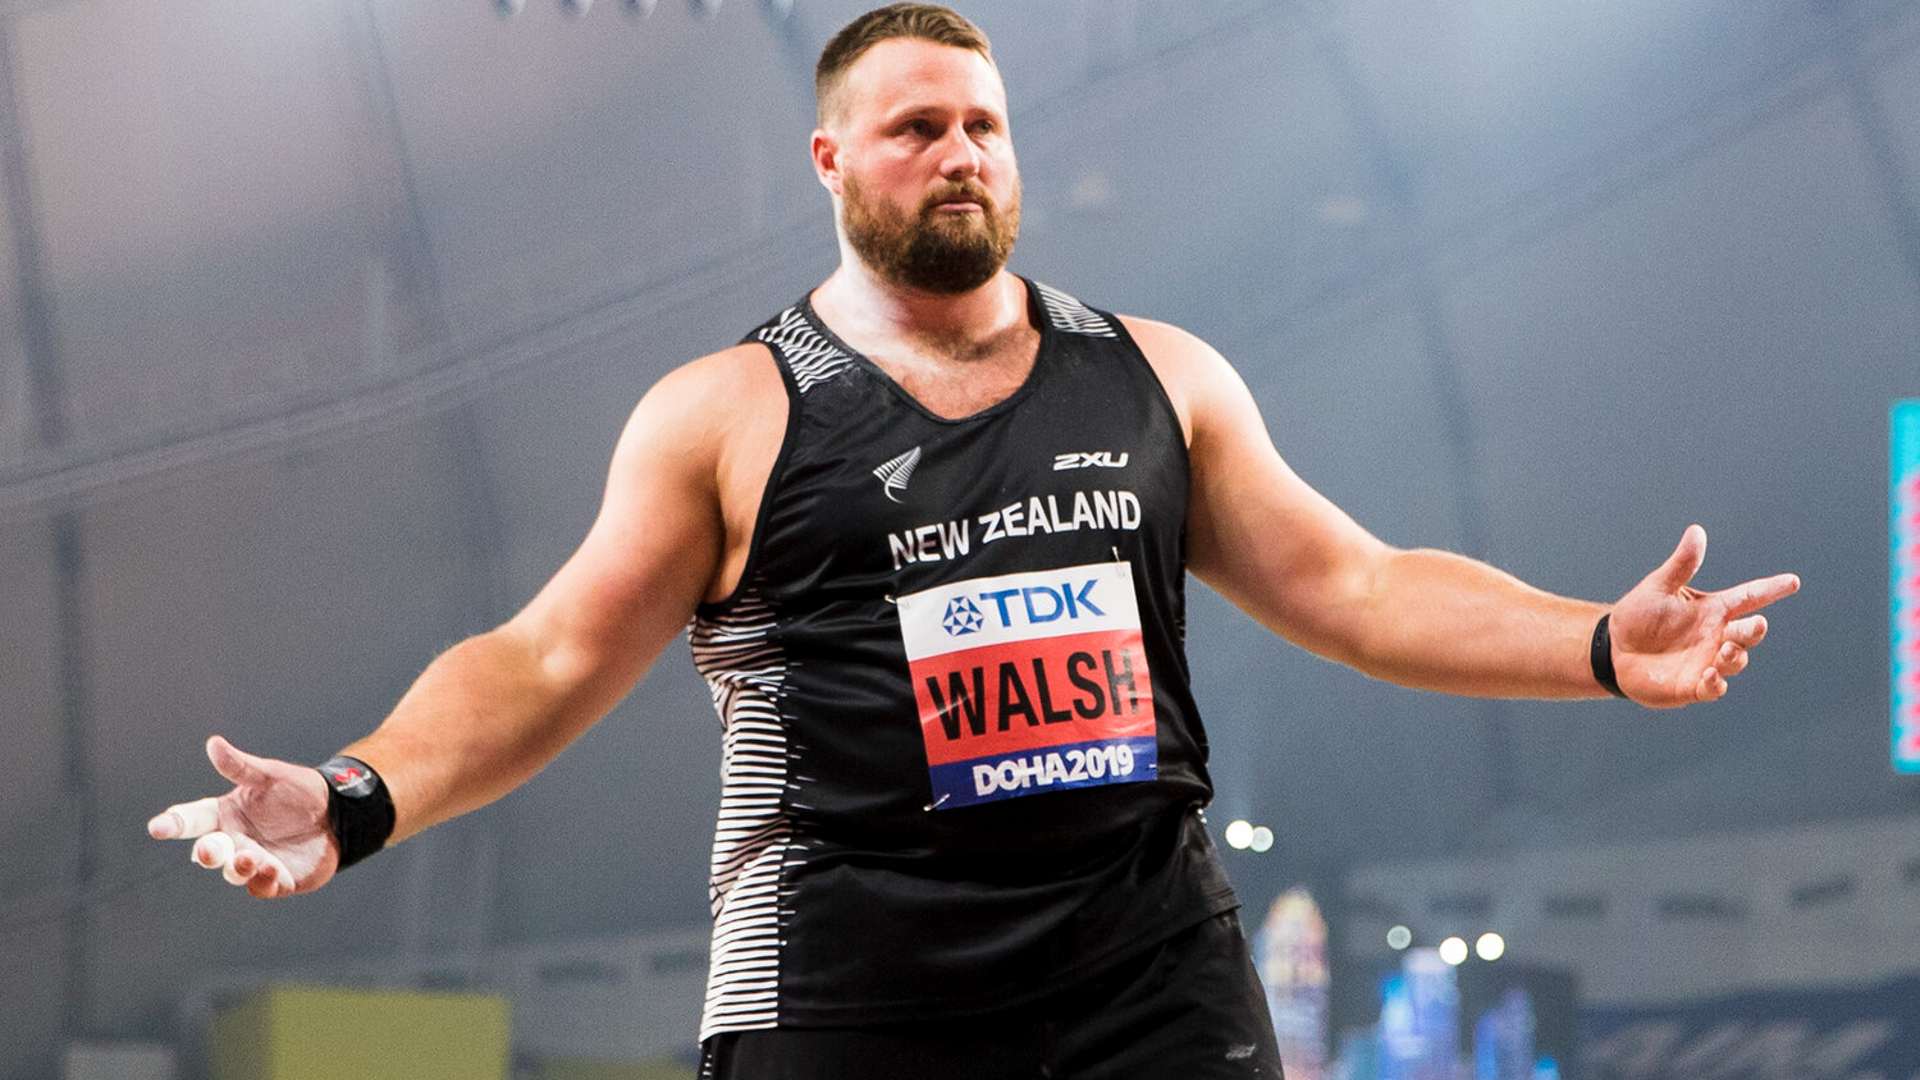 Tom Walsh in Doha 2019 (Image Credits - Instagram/ @tomwalshnzl)